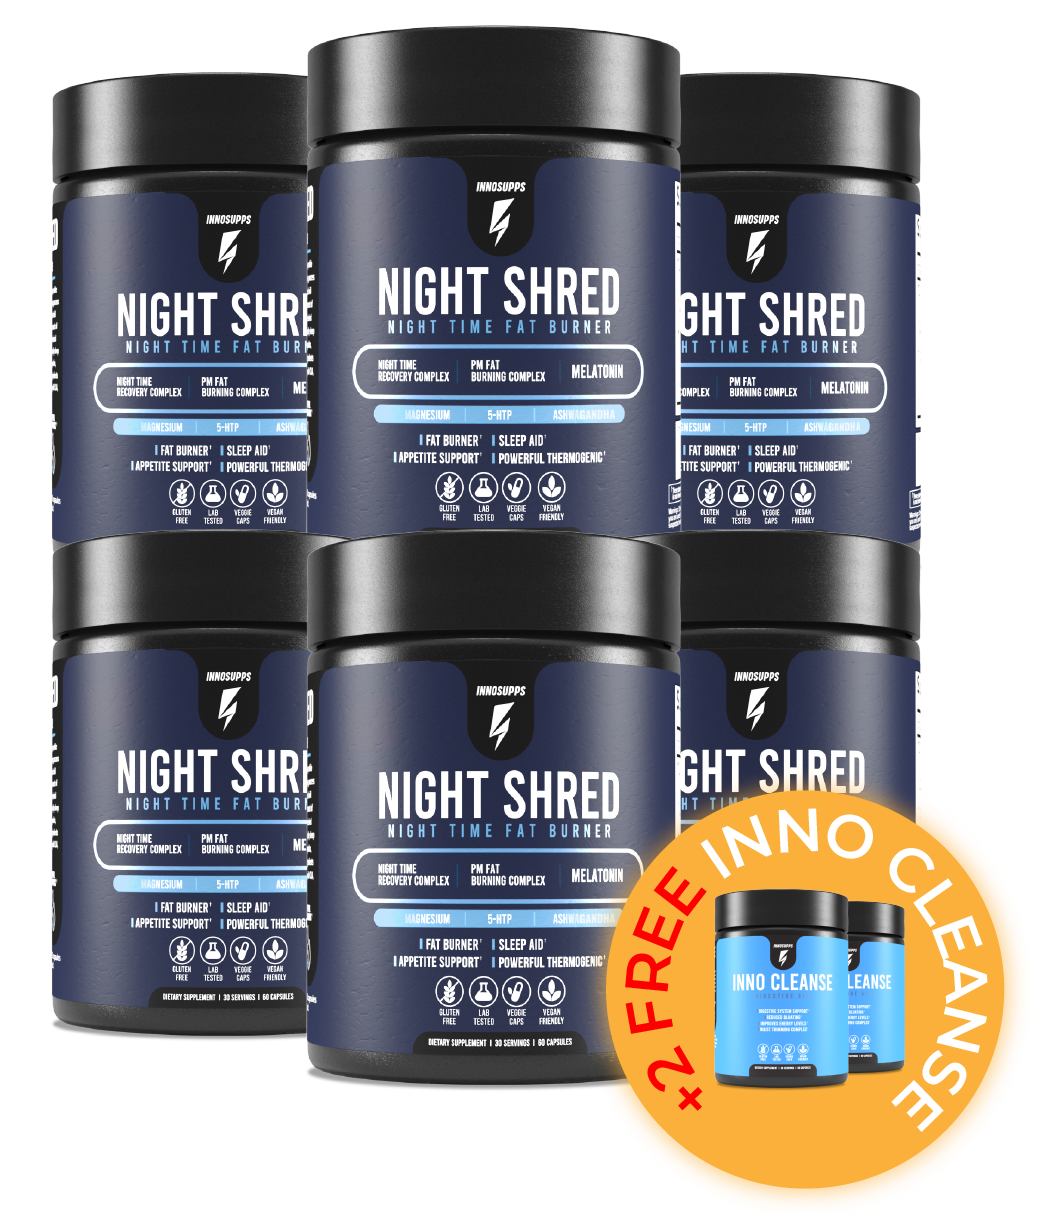 6 Bottles of Night Shred + 2 Free Inno Cleanse